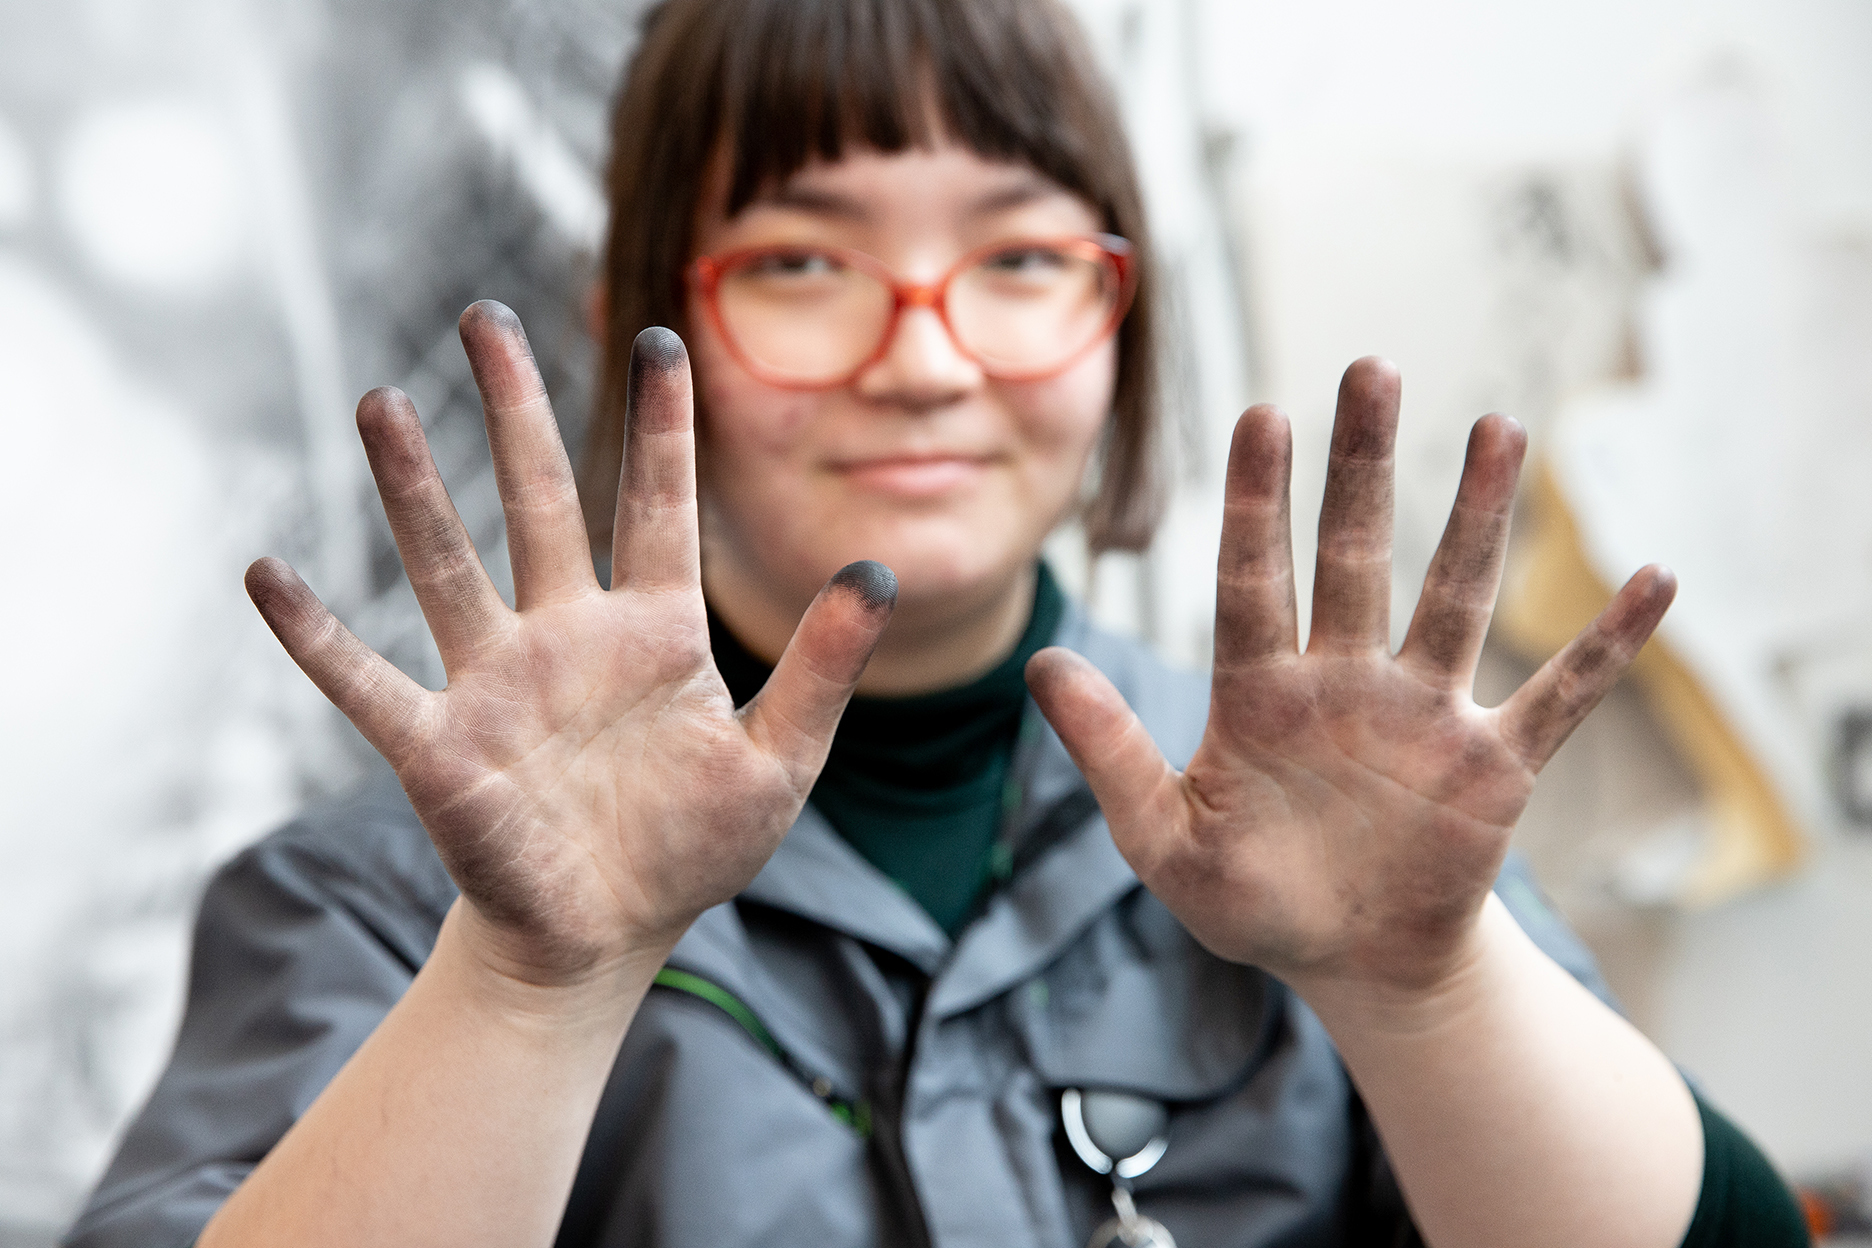 A person holds up hands stained with charcoal.